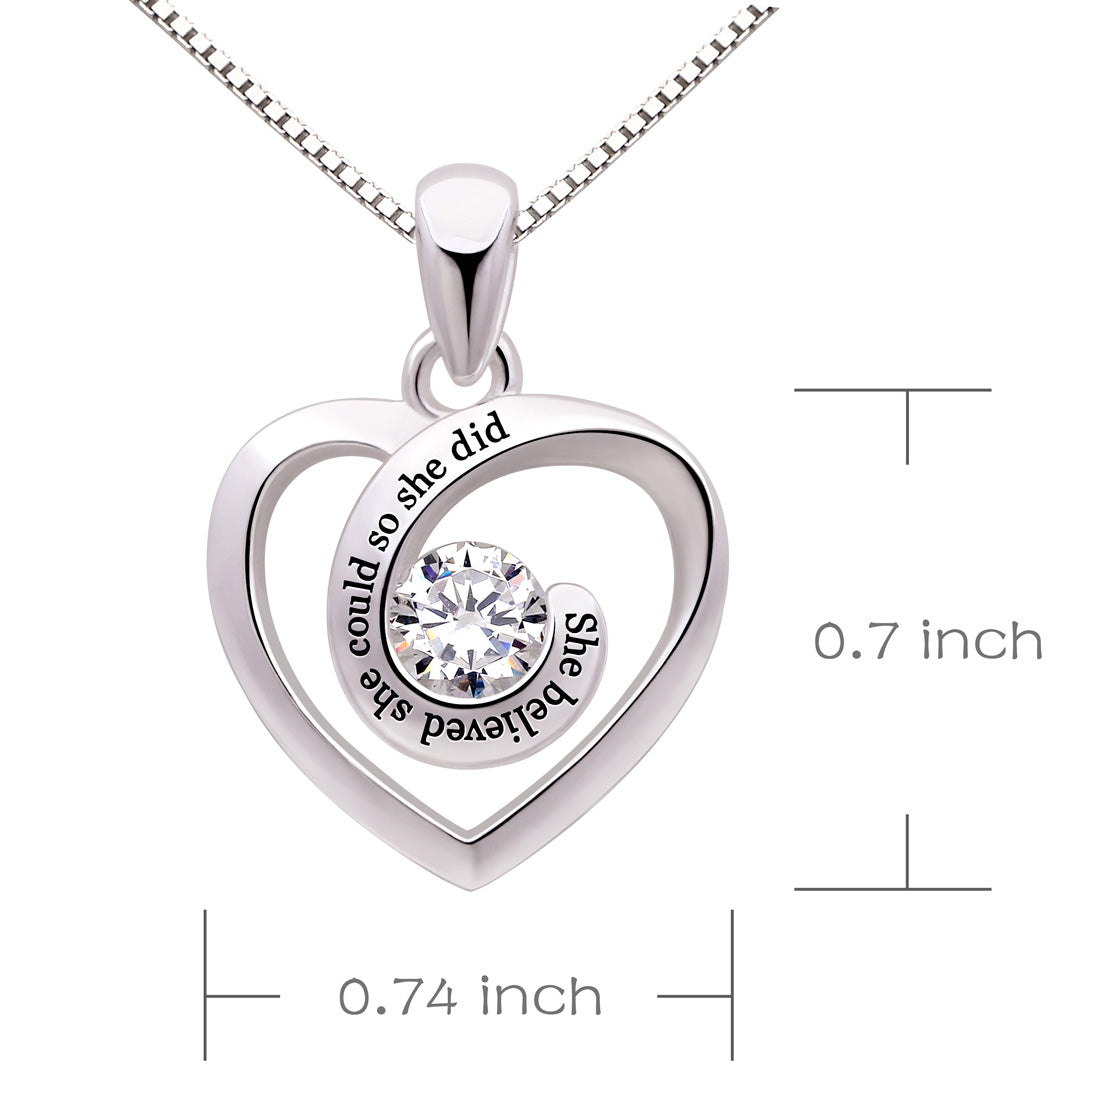 ALOV Jewelry Sterling Silver "She believed she could so she did" Love Heart Cubic Zirconia Pendant Necklace